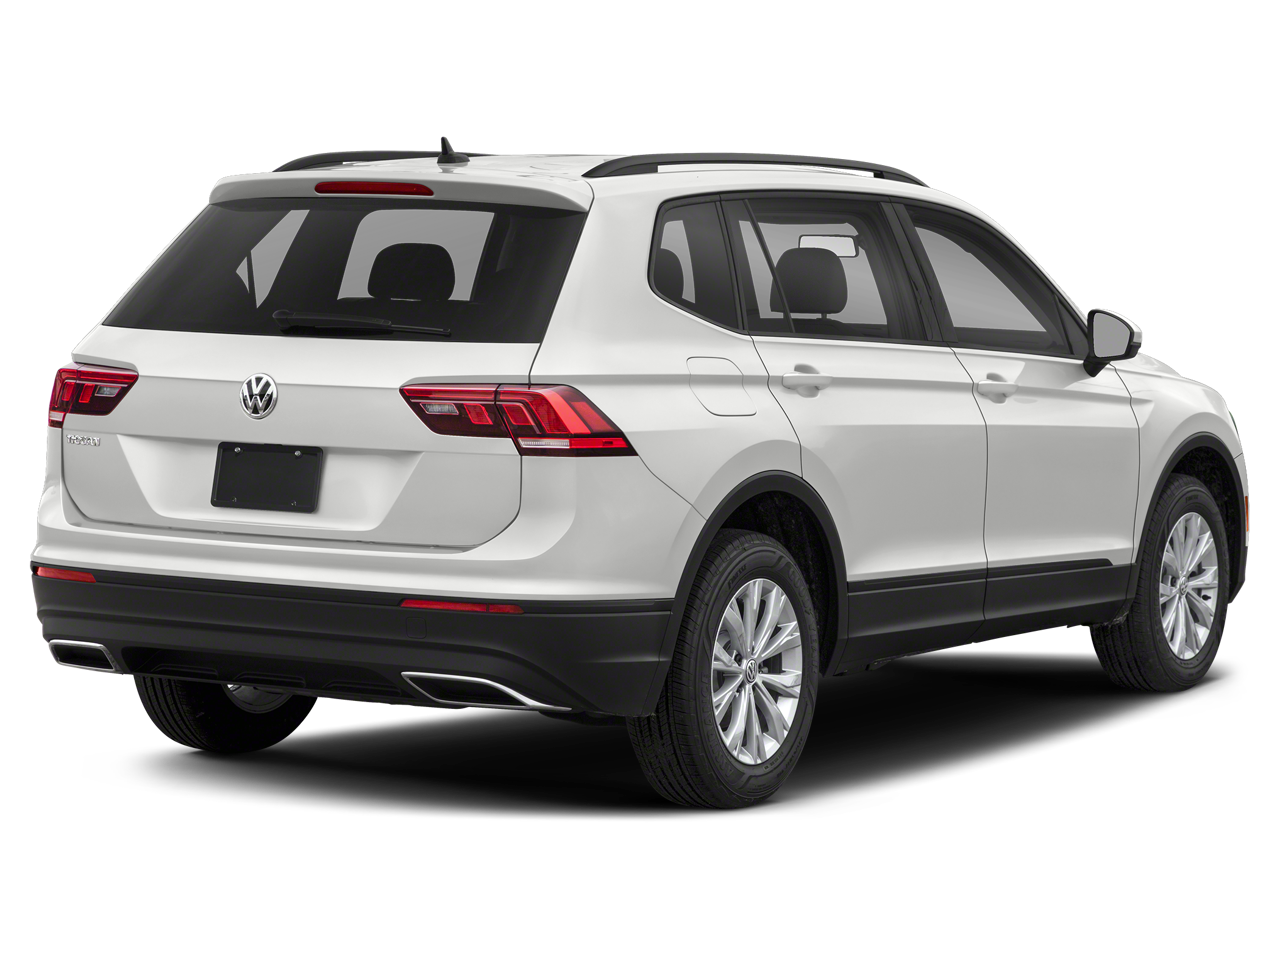 Used 2020 Volkswagen Tiguan S with VIN 3VV0B7AXXLM104805 for sale in Prince George, VA